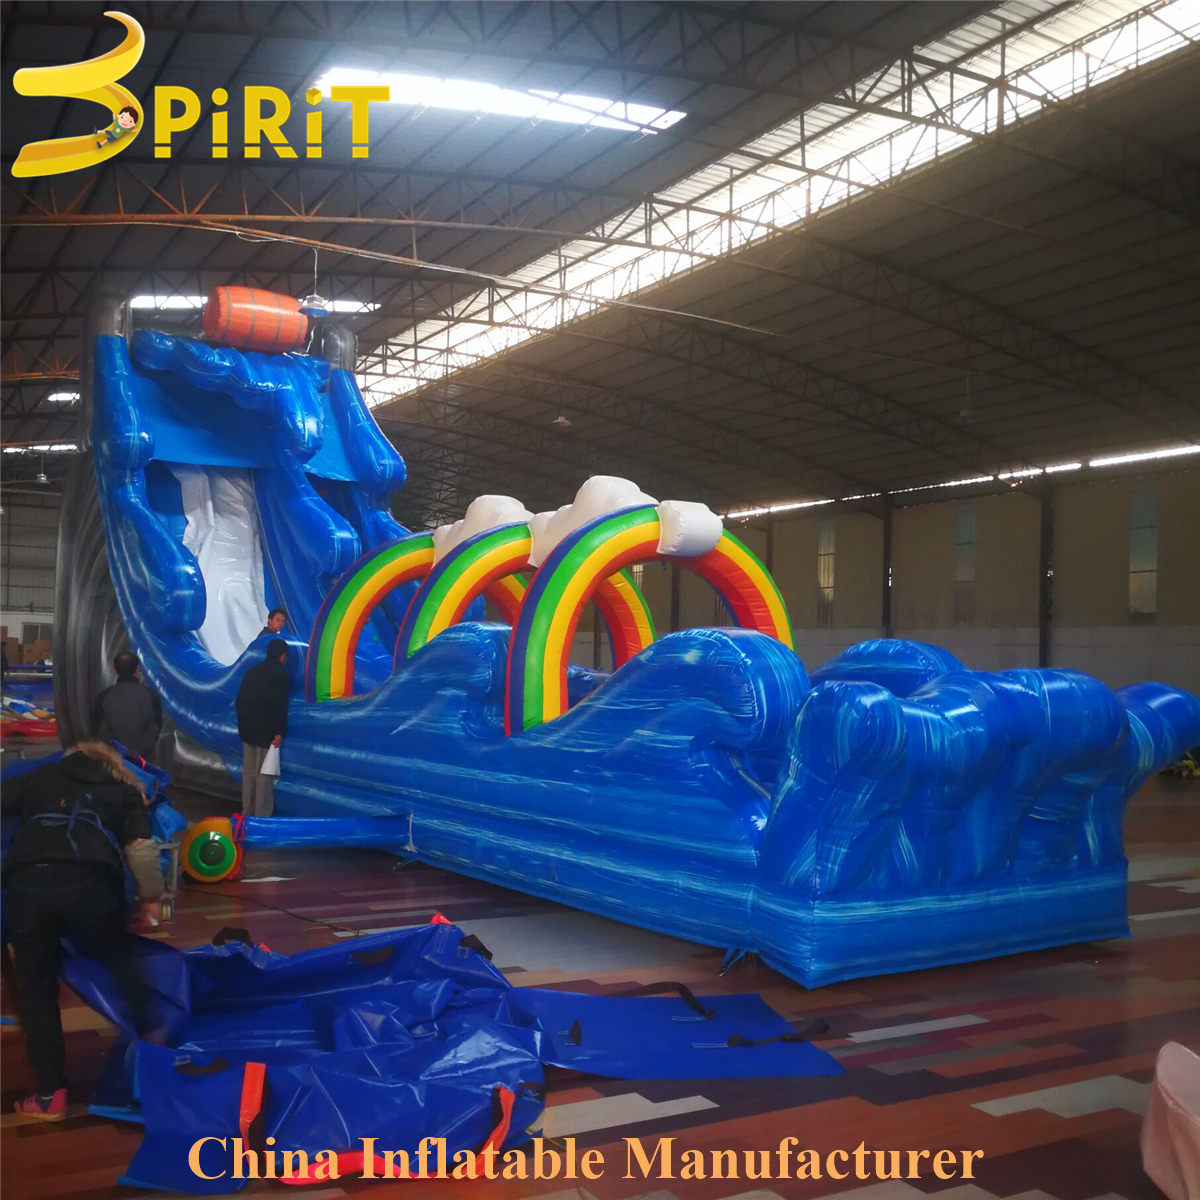 Buy cheap water slide for sale used in hot summer.-SPIRIT PLAY,Outdoor Playground, Indoor Playground,Trampoline Park,Outdoor Fitness,Inflatable,Soft Playground,Ninja Warrior,Trampoline Park,Playground Structure,Play Structure,Outdoor Fitness,Water Park,Play System,Freestanding,Interactive,independente ,Inklusibo, Park, Pagsaka sa Bungbong, Dula sa Bata